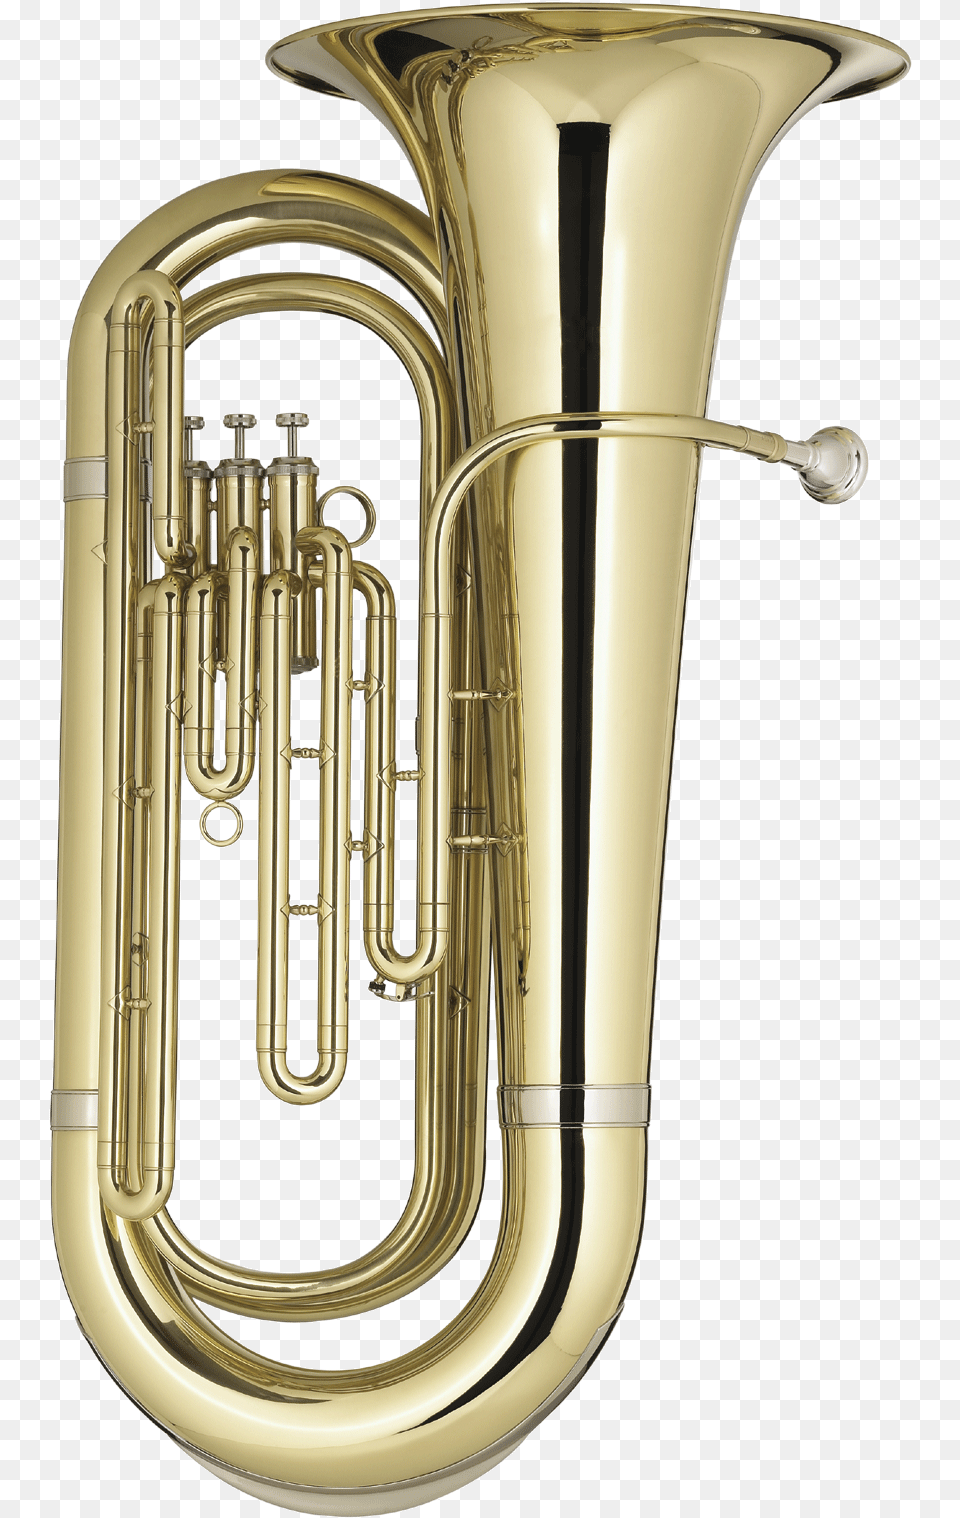 Haize Metalezko Musika Tresnak Baritone Compared To Tuba, Brass Section, Horn, Musical Instrument Free Png